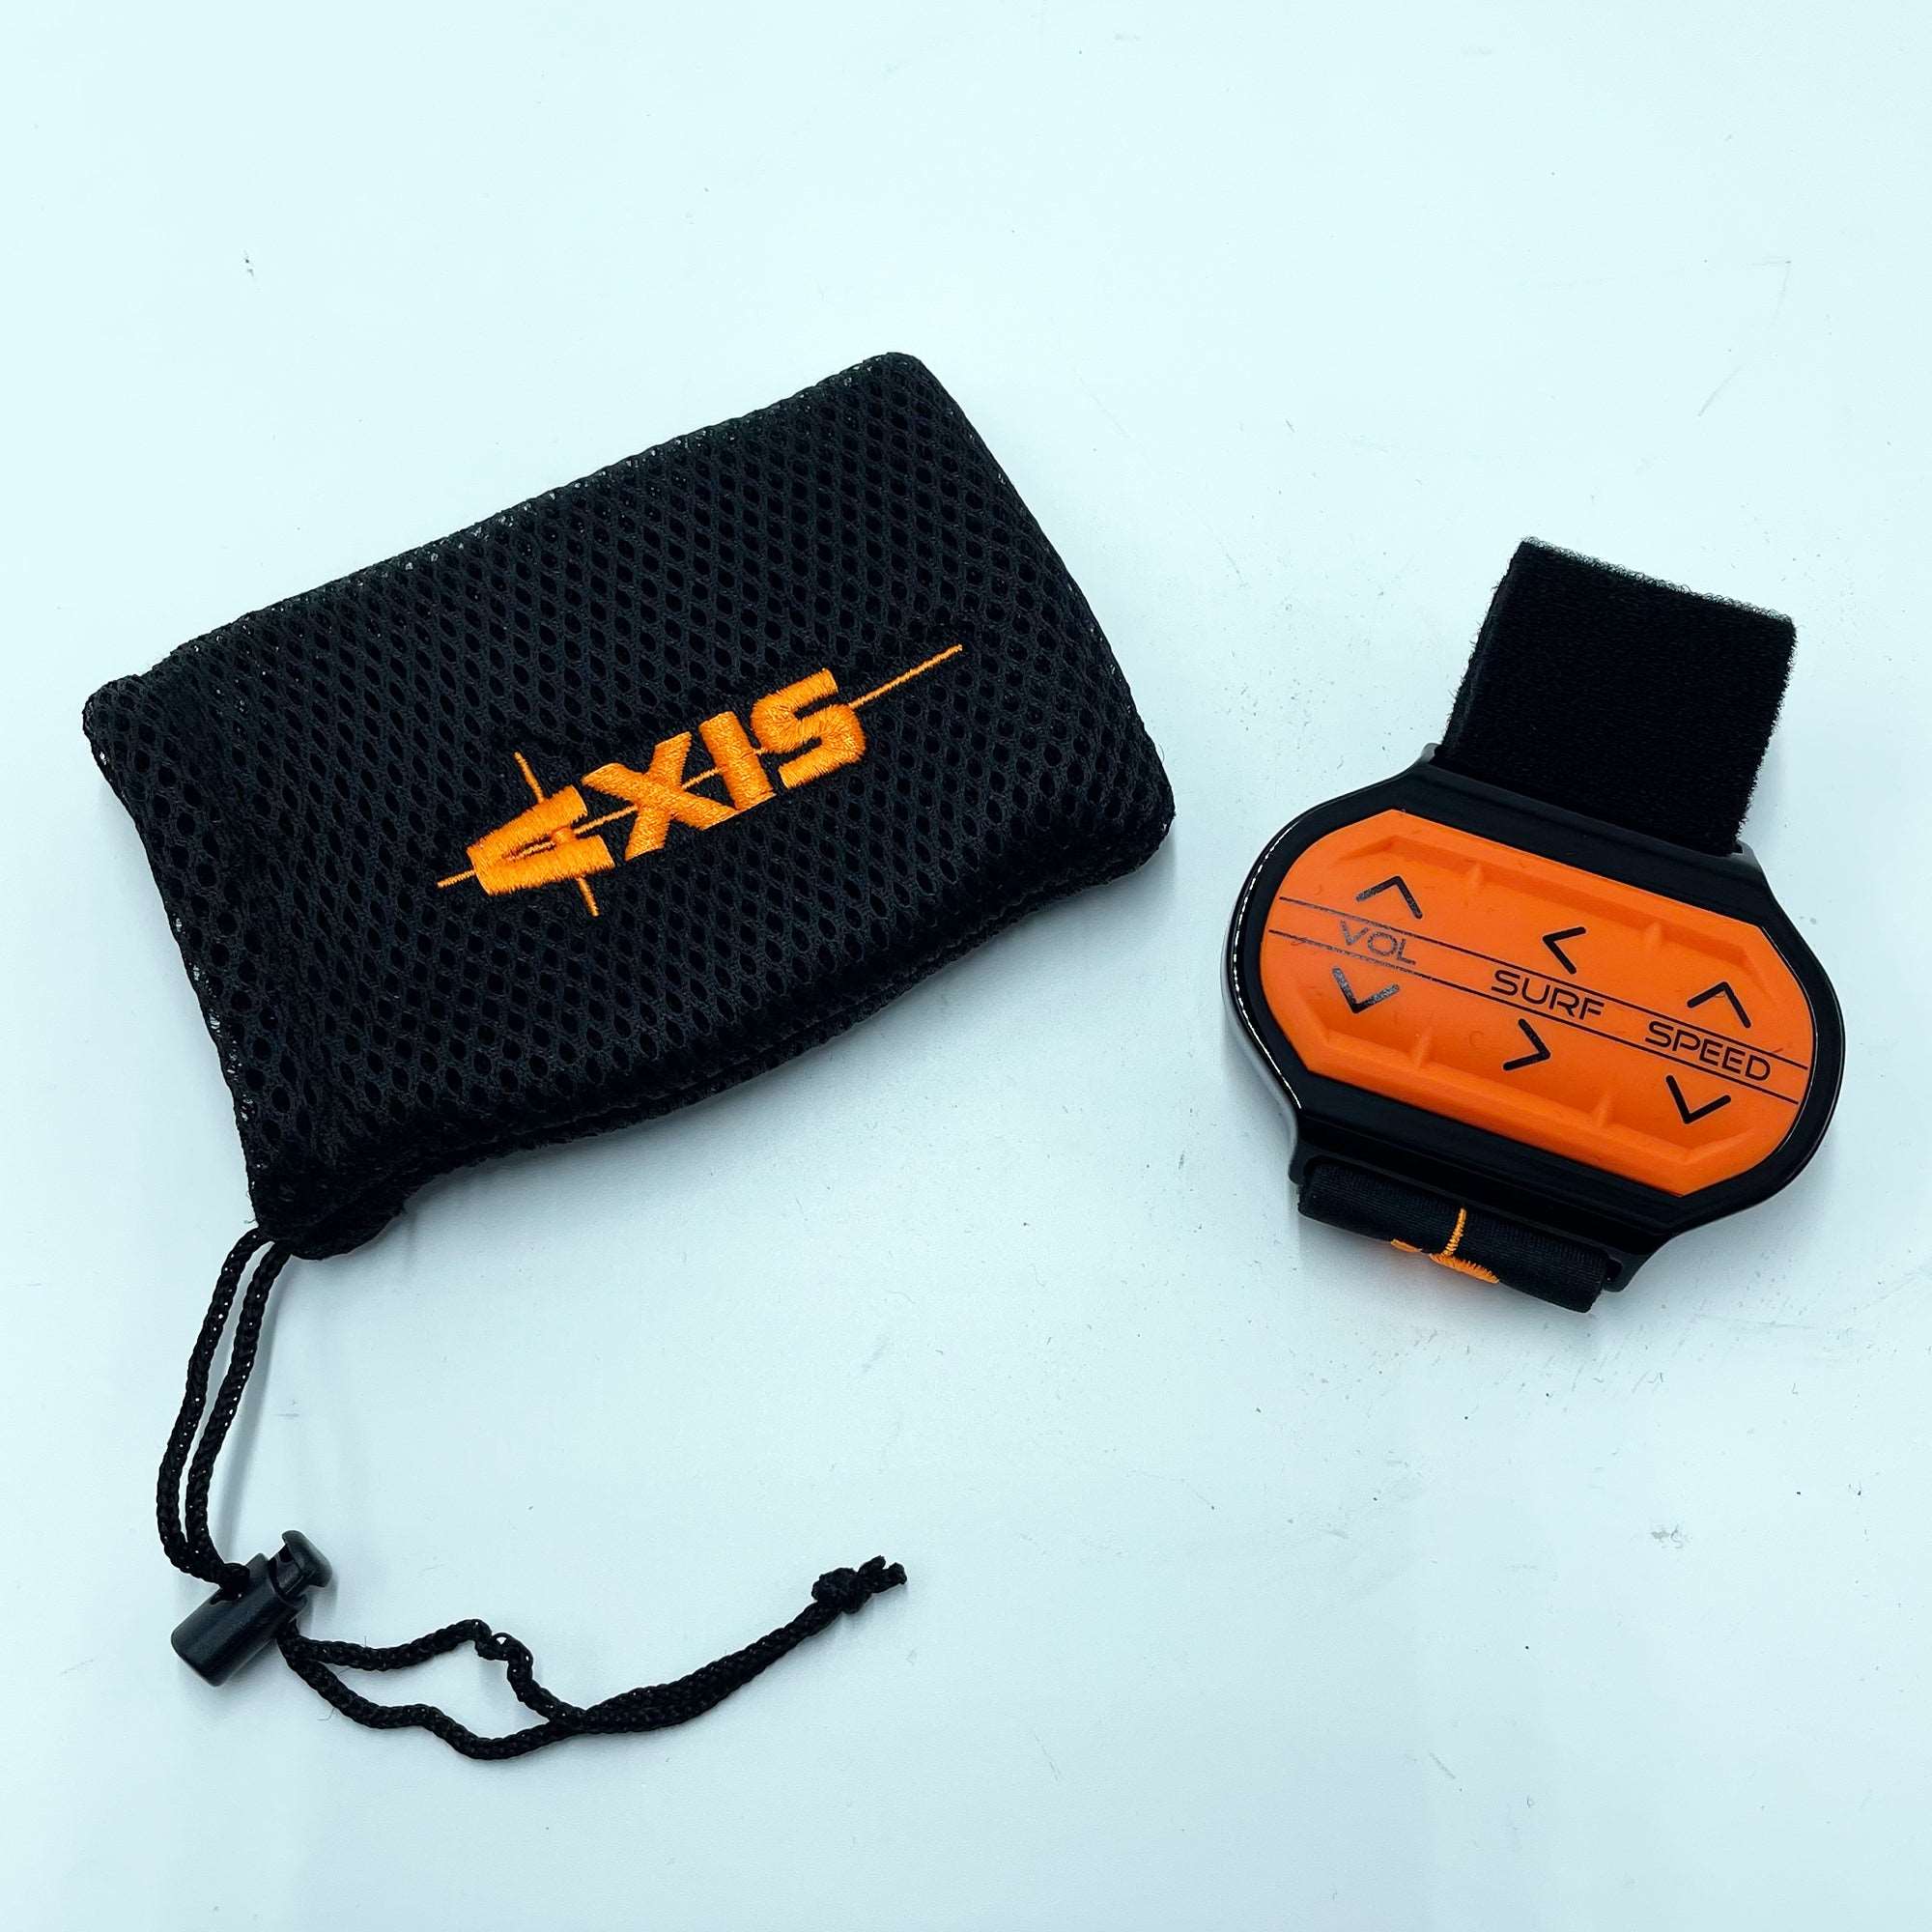 A small orange and black Axis Wake Surf Band 2017 with a pouch next to it that can adjust boat speed and perform wake transfers.